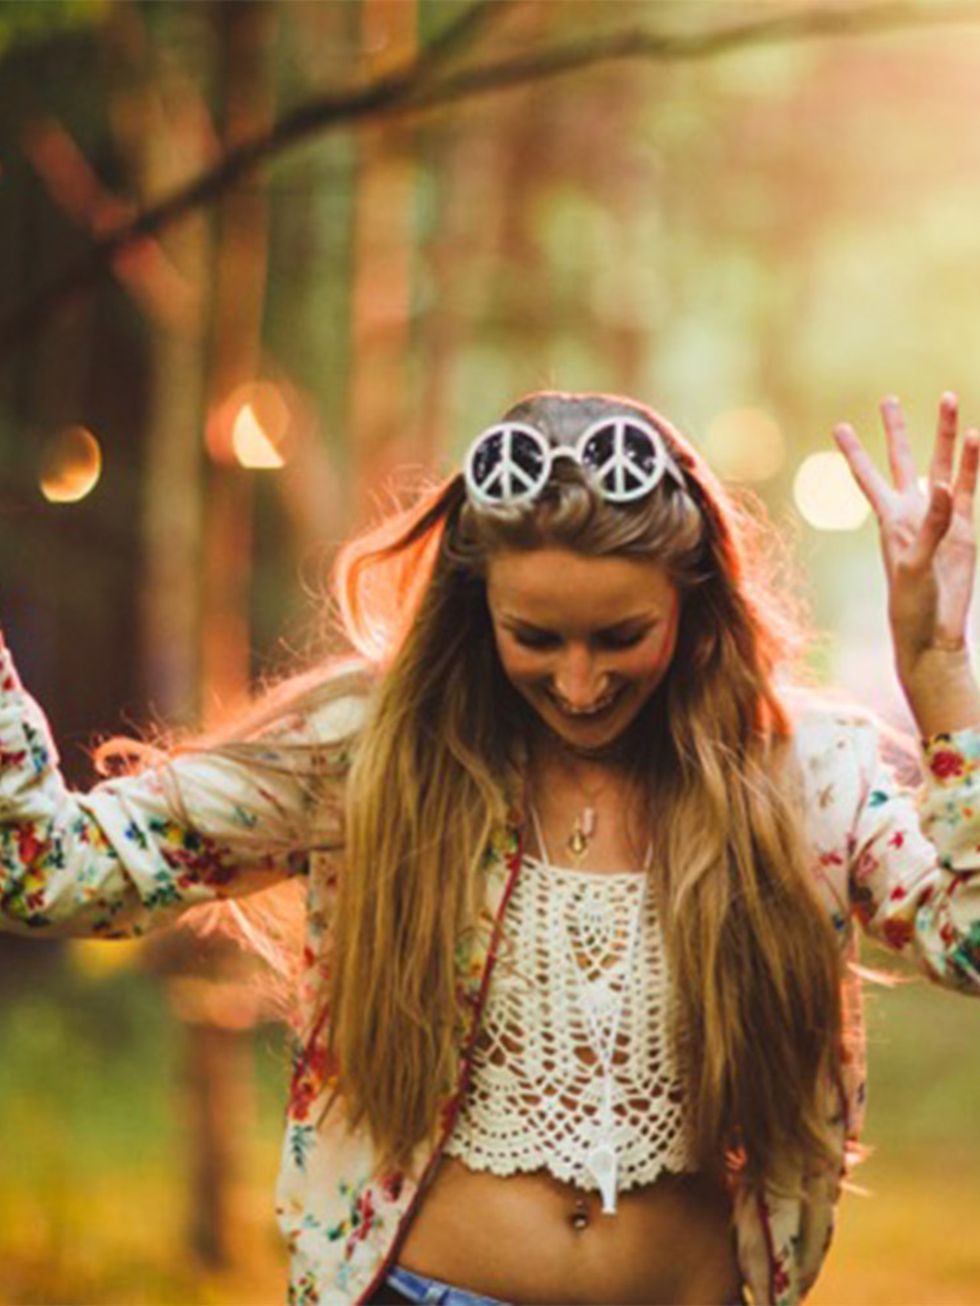 <p>FESTIVAL: Lost Village</p>

<p>And festival season is officially&hellip; GO! This summer&rsquo;s field-based fun gets underway this weekend, and our top pick is this boutique shindig in Lincolnshire. Less festival, more &lsquo;immersive parallel world 